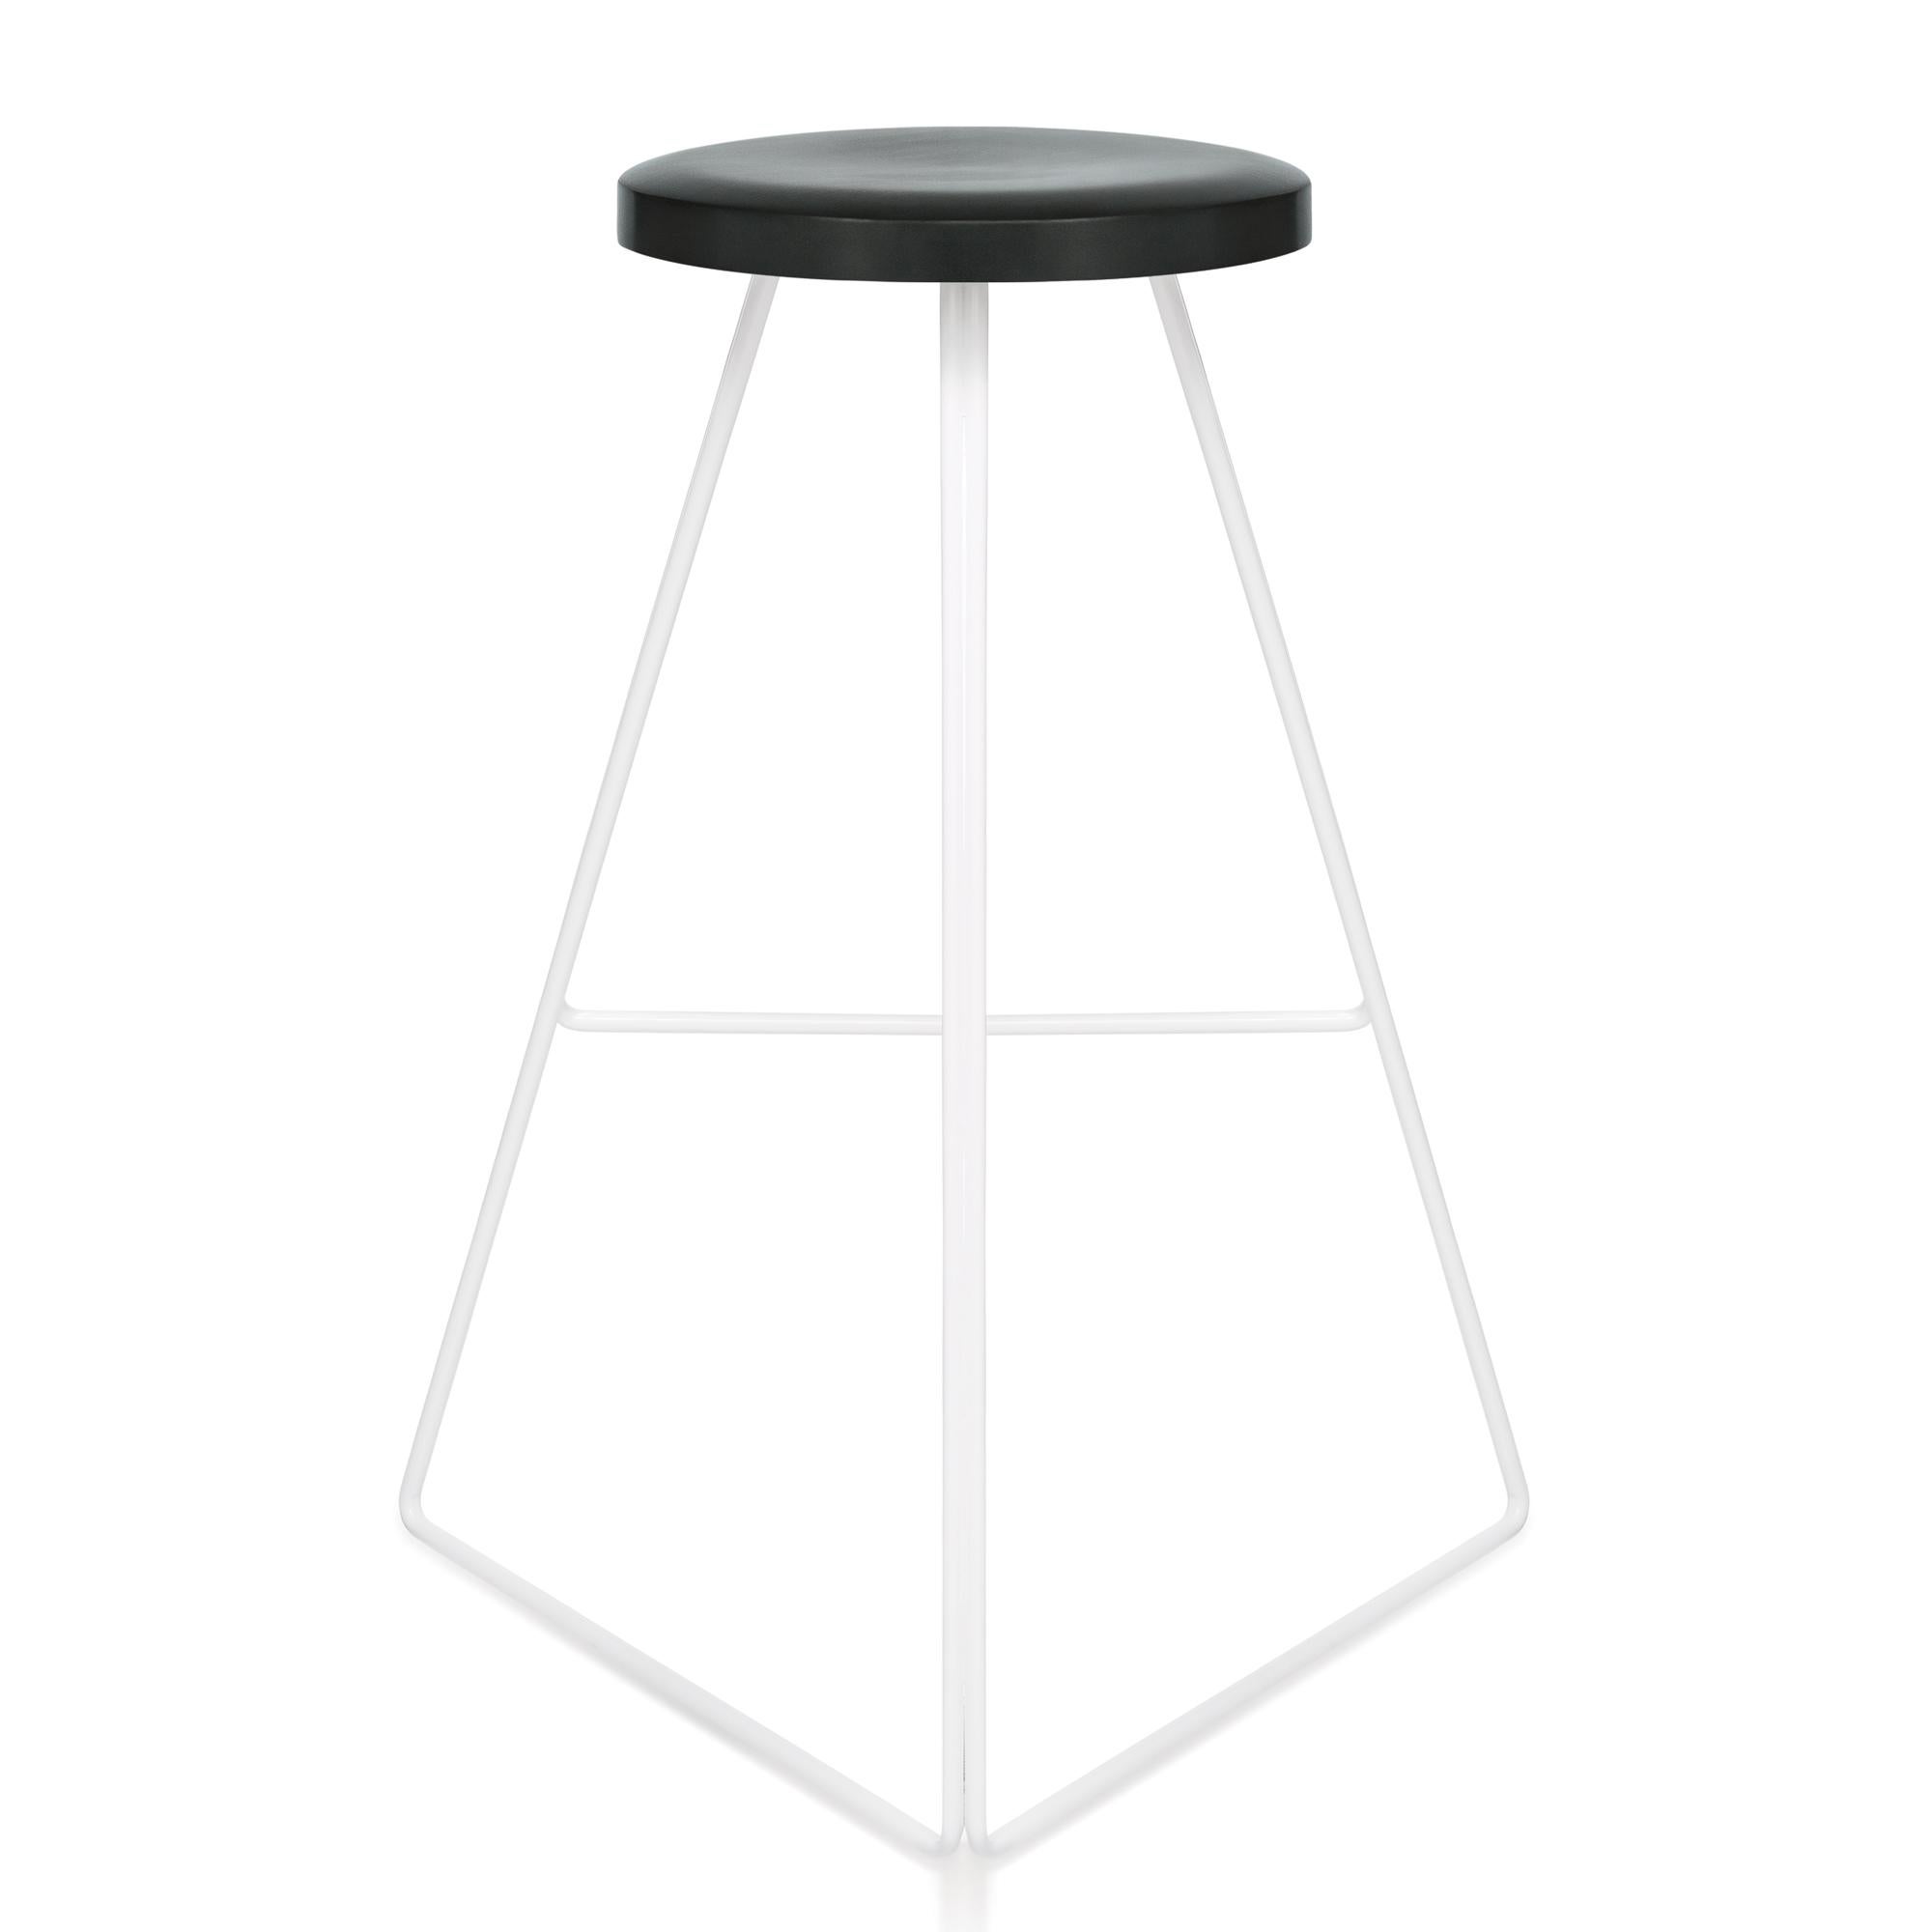 North American Coleman Stool, White and Charcoal, Counter Height For Sale